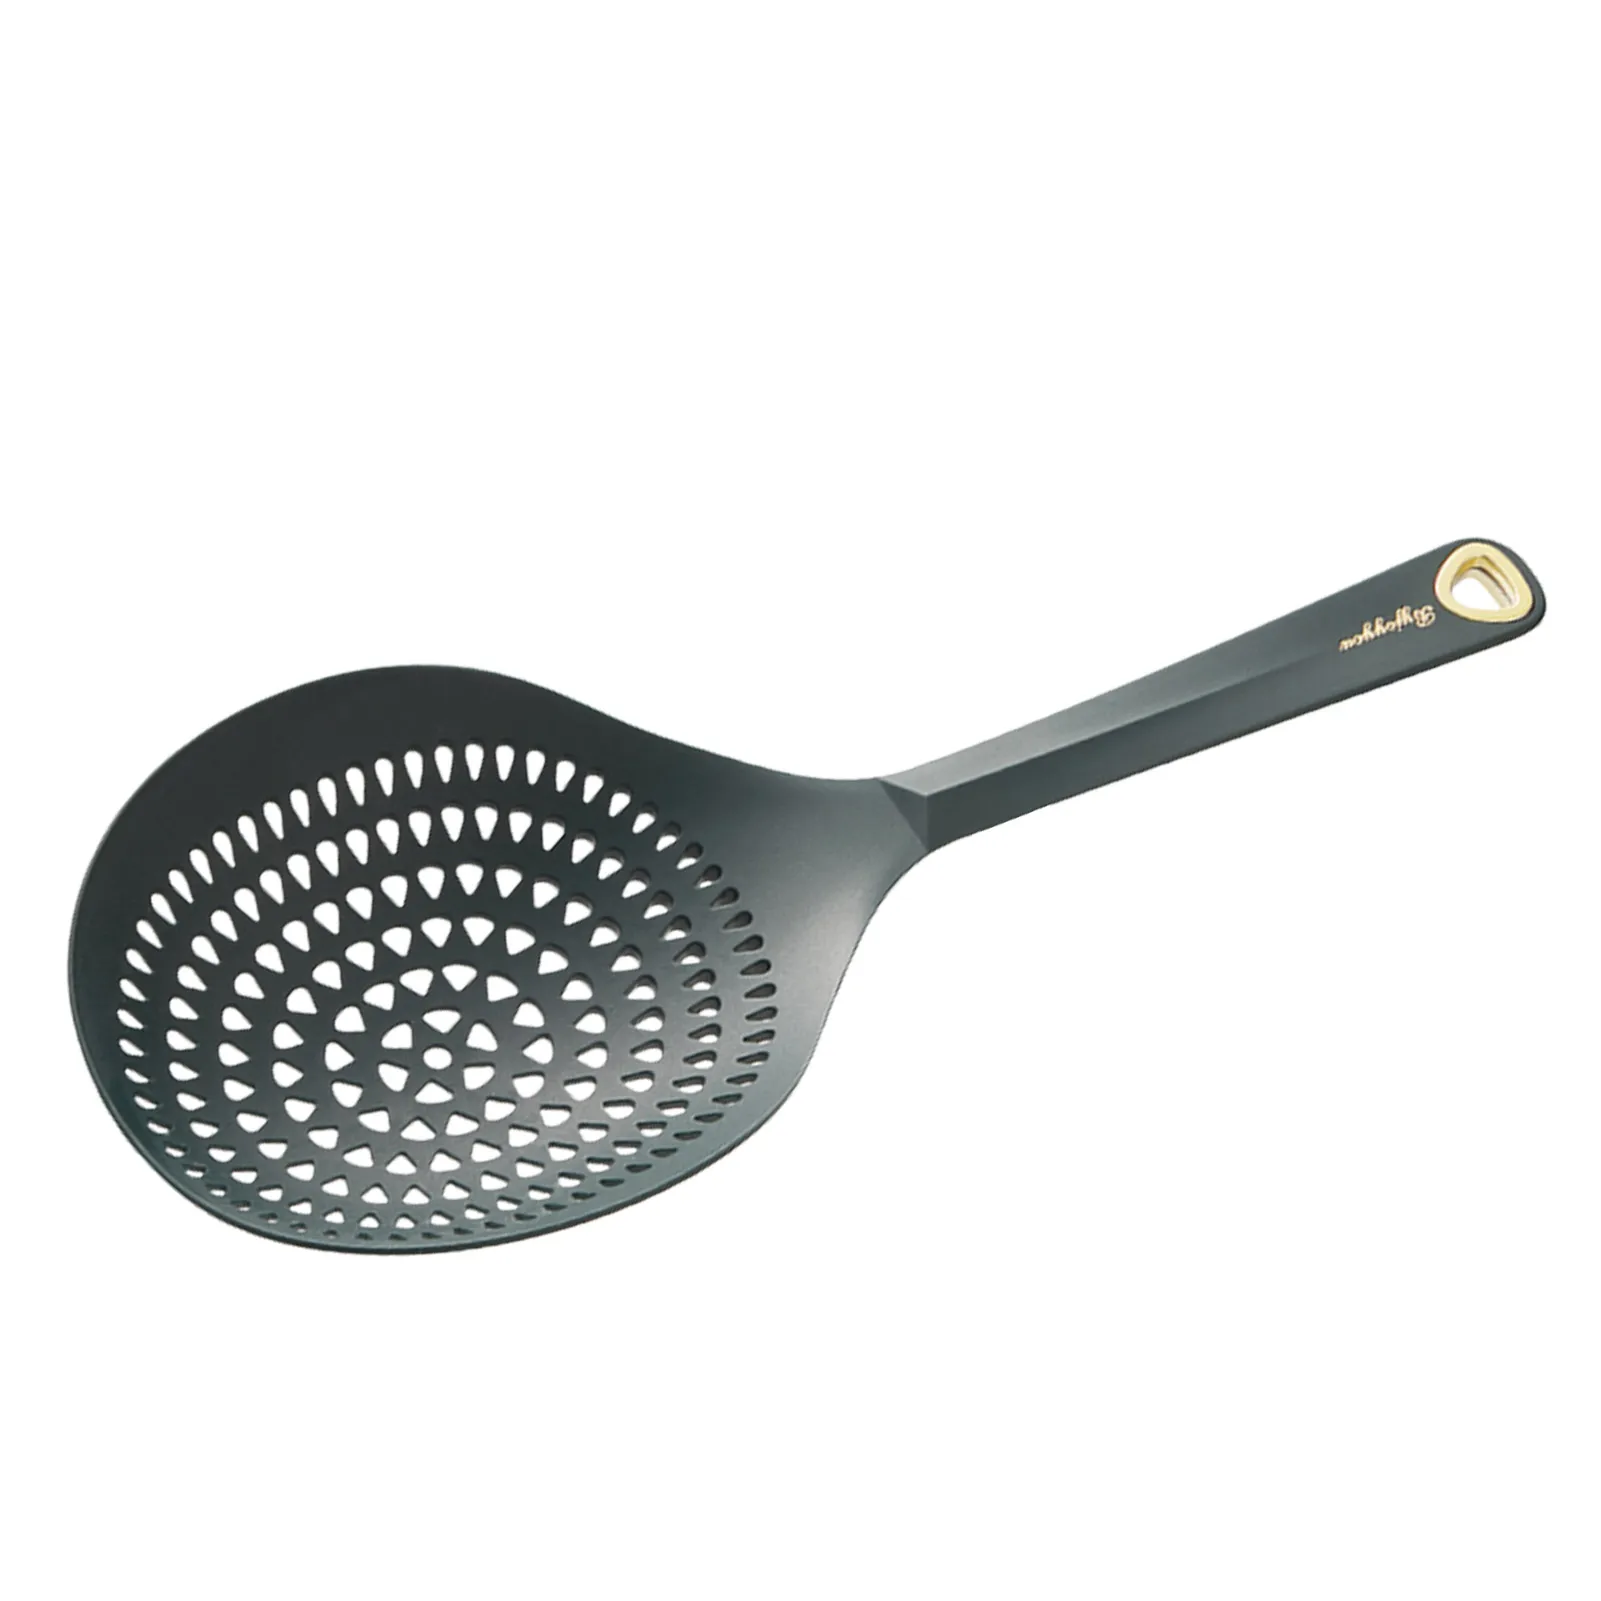 

Slotted Colander Spoon Slotted Kitchen Cooking Scoop Essentials Nylon Kitchen Food Drain Shovel Strainers Pasta Colander For